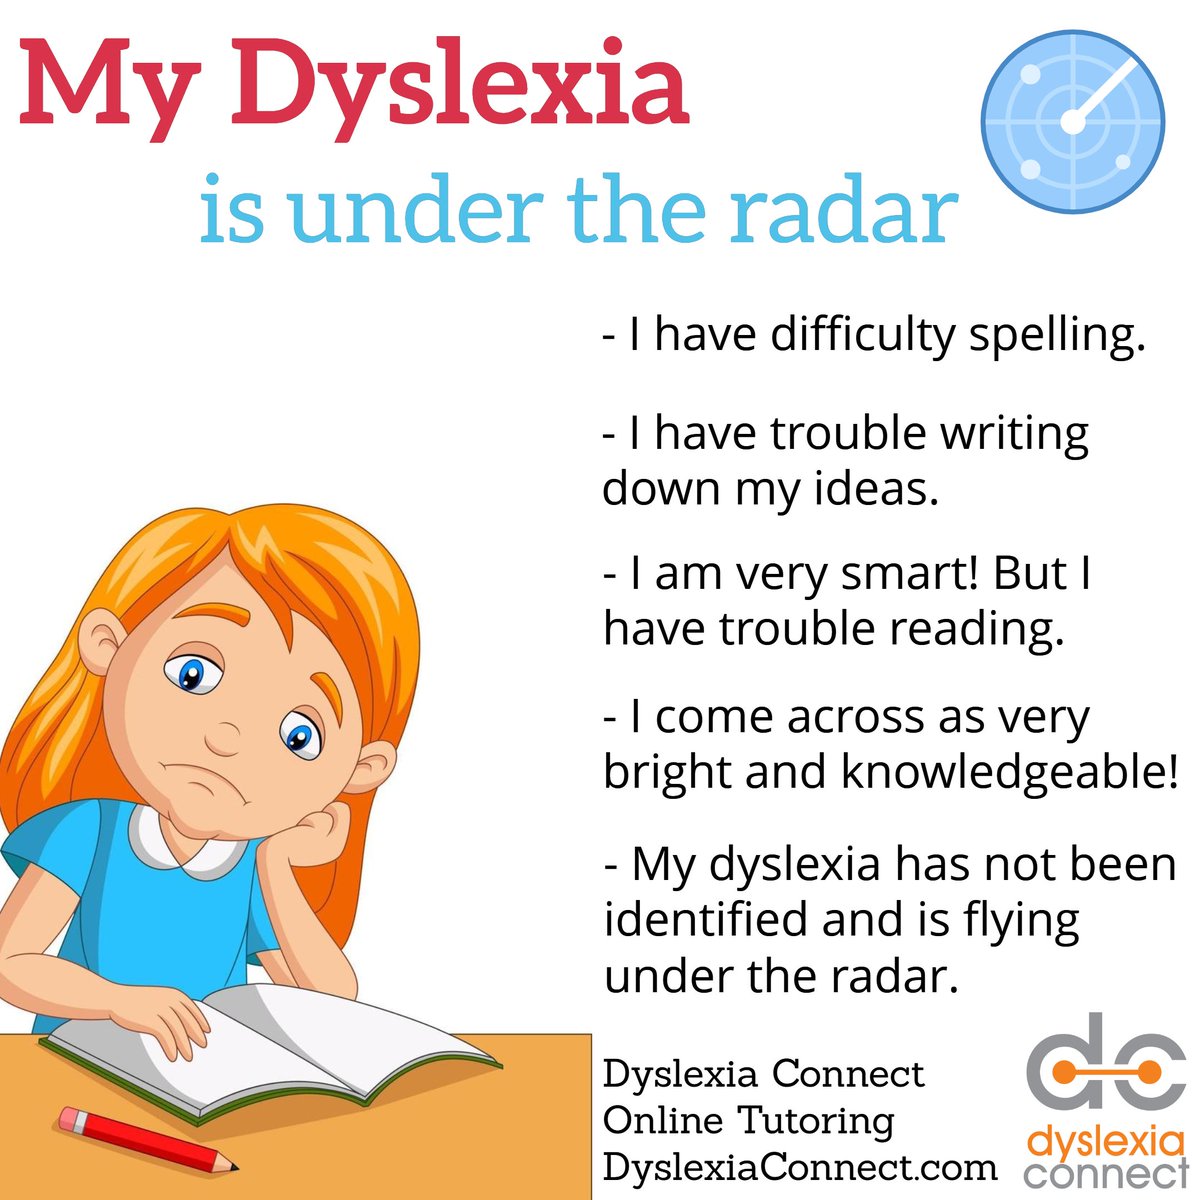 Intelligent students with mild or moderate dyslexia sometimes fly under the radar in school and are not identified as having dyslexia. It's important that we pay attention to the signs of dyslexia, so that we can provide them with support! DyslexiaConnect.com #Dyslexia #ADHD